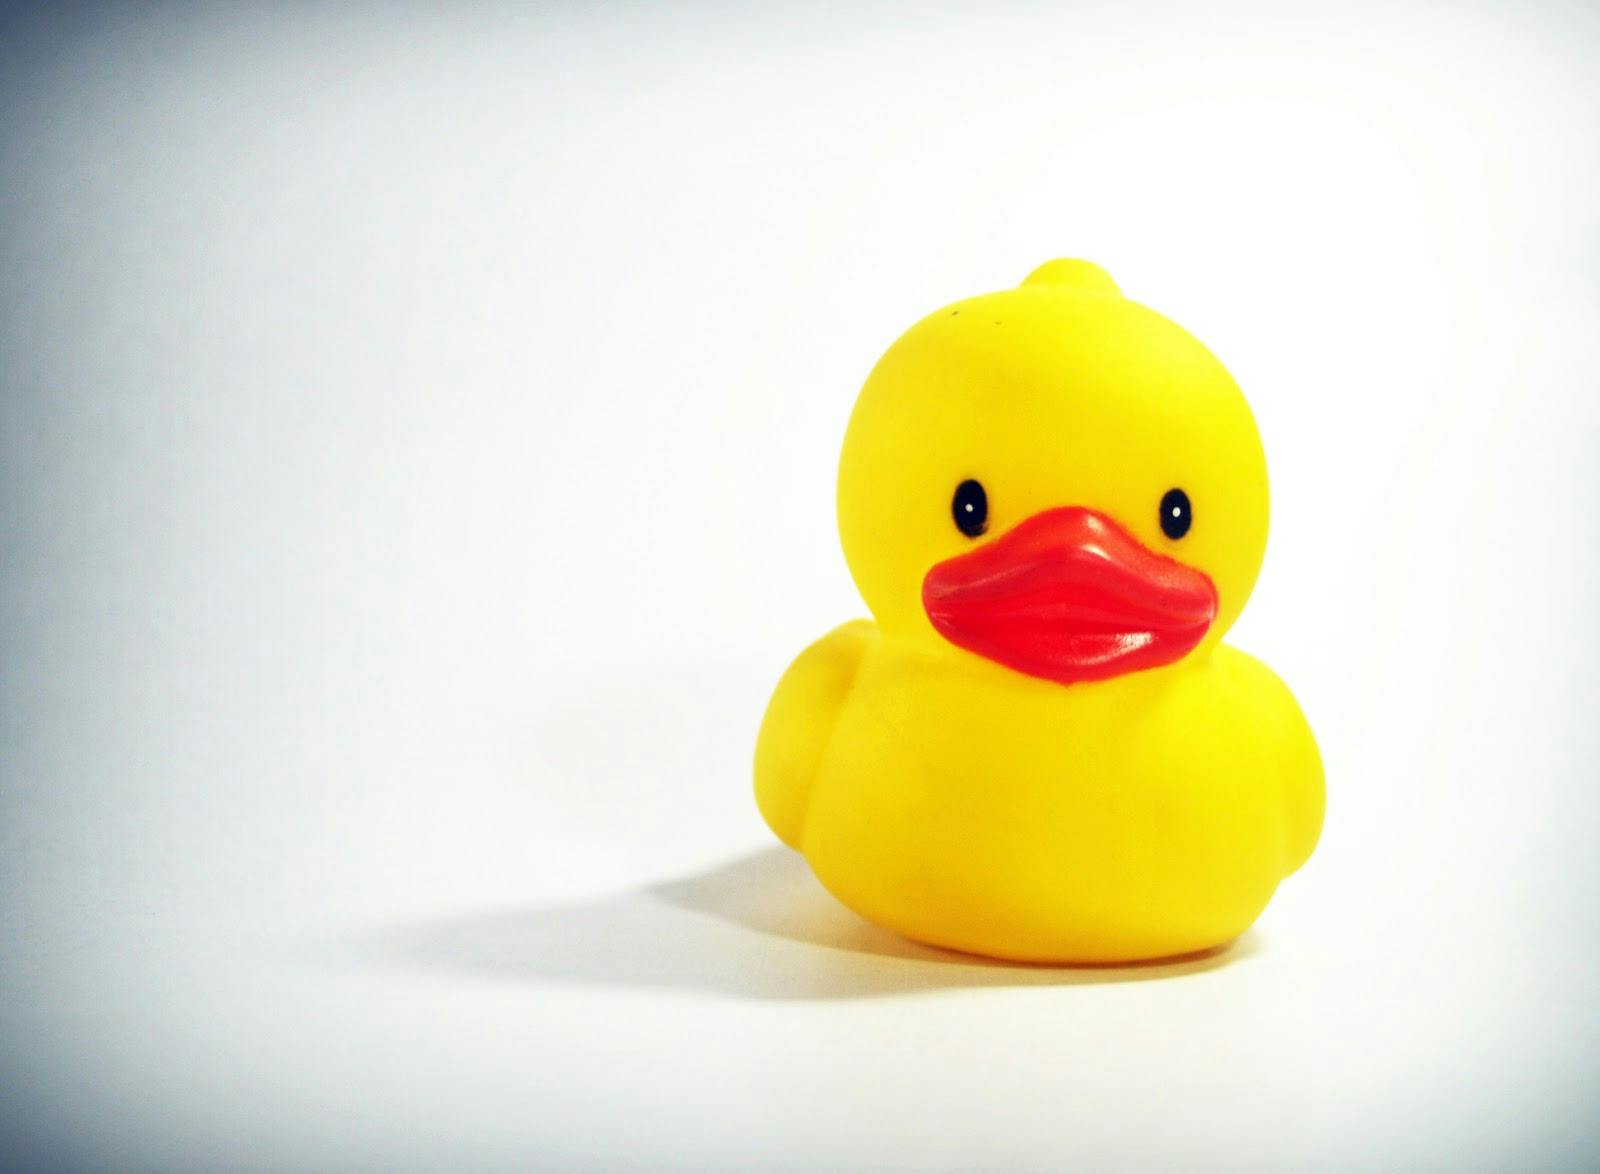 Yellow duck toy used for rubber duck debugging.